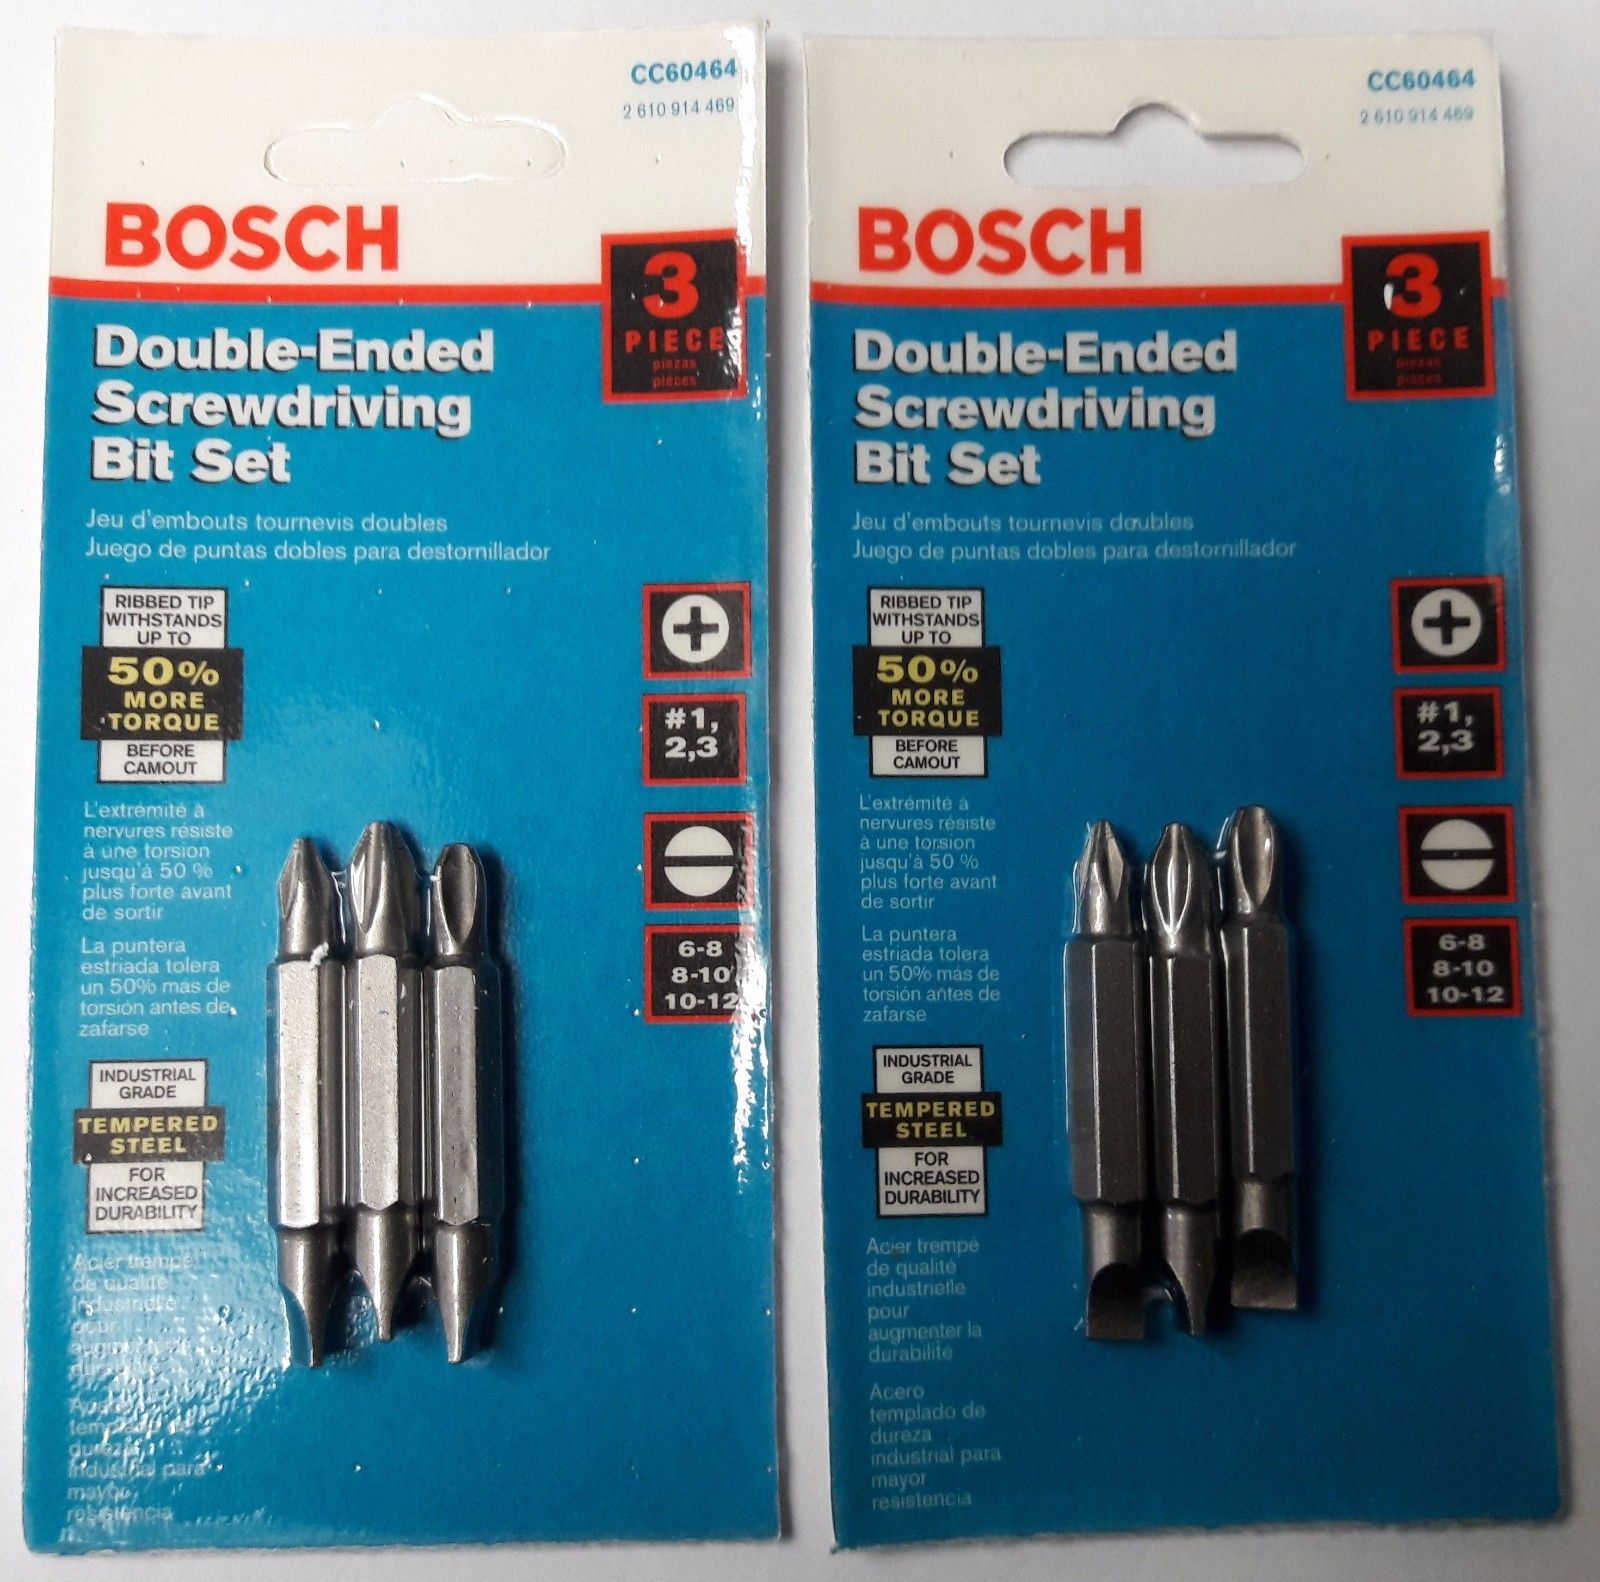 Bosch CC60464 Double-End Bits 2" Phillips Straight USA 2-3 Packs